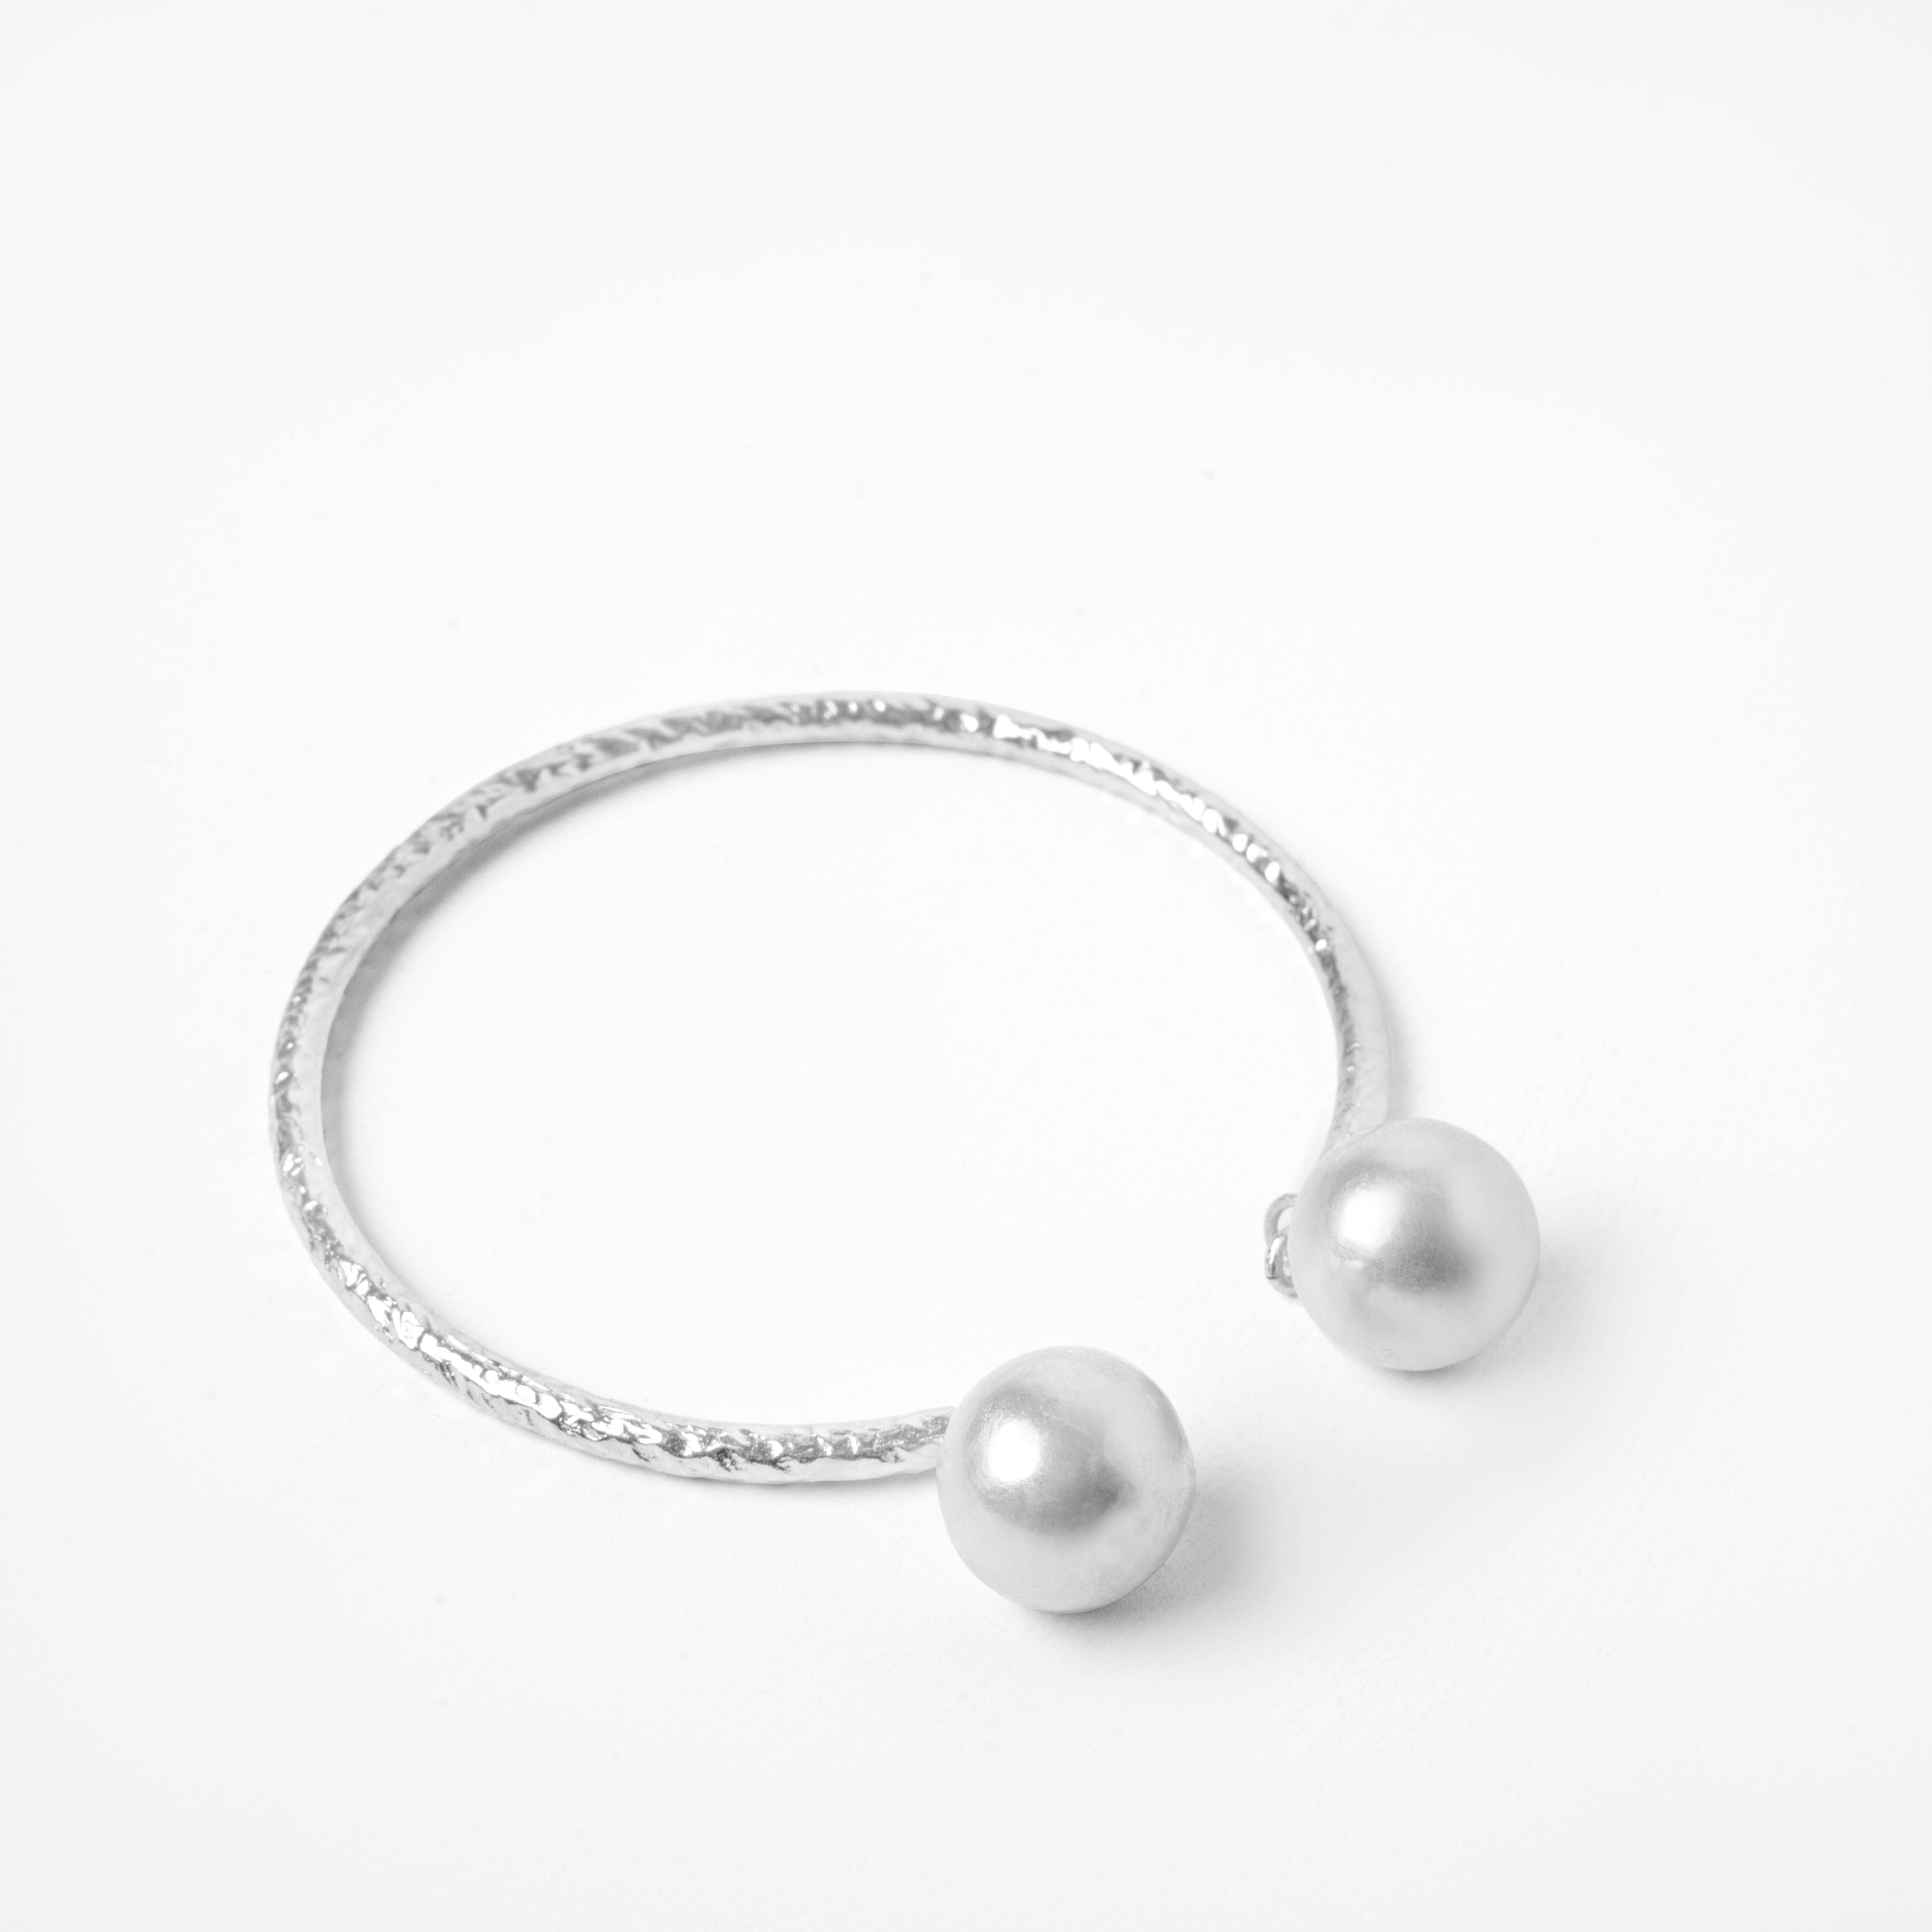 DUALDROP BANGLE - SILVER TONE, a product by Equiivalence